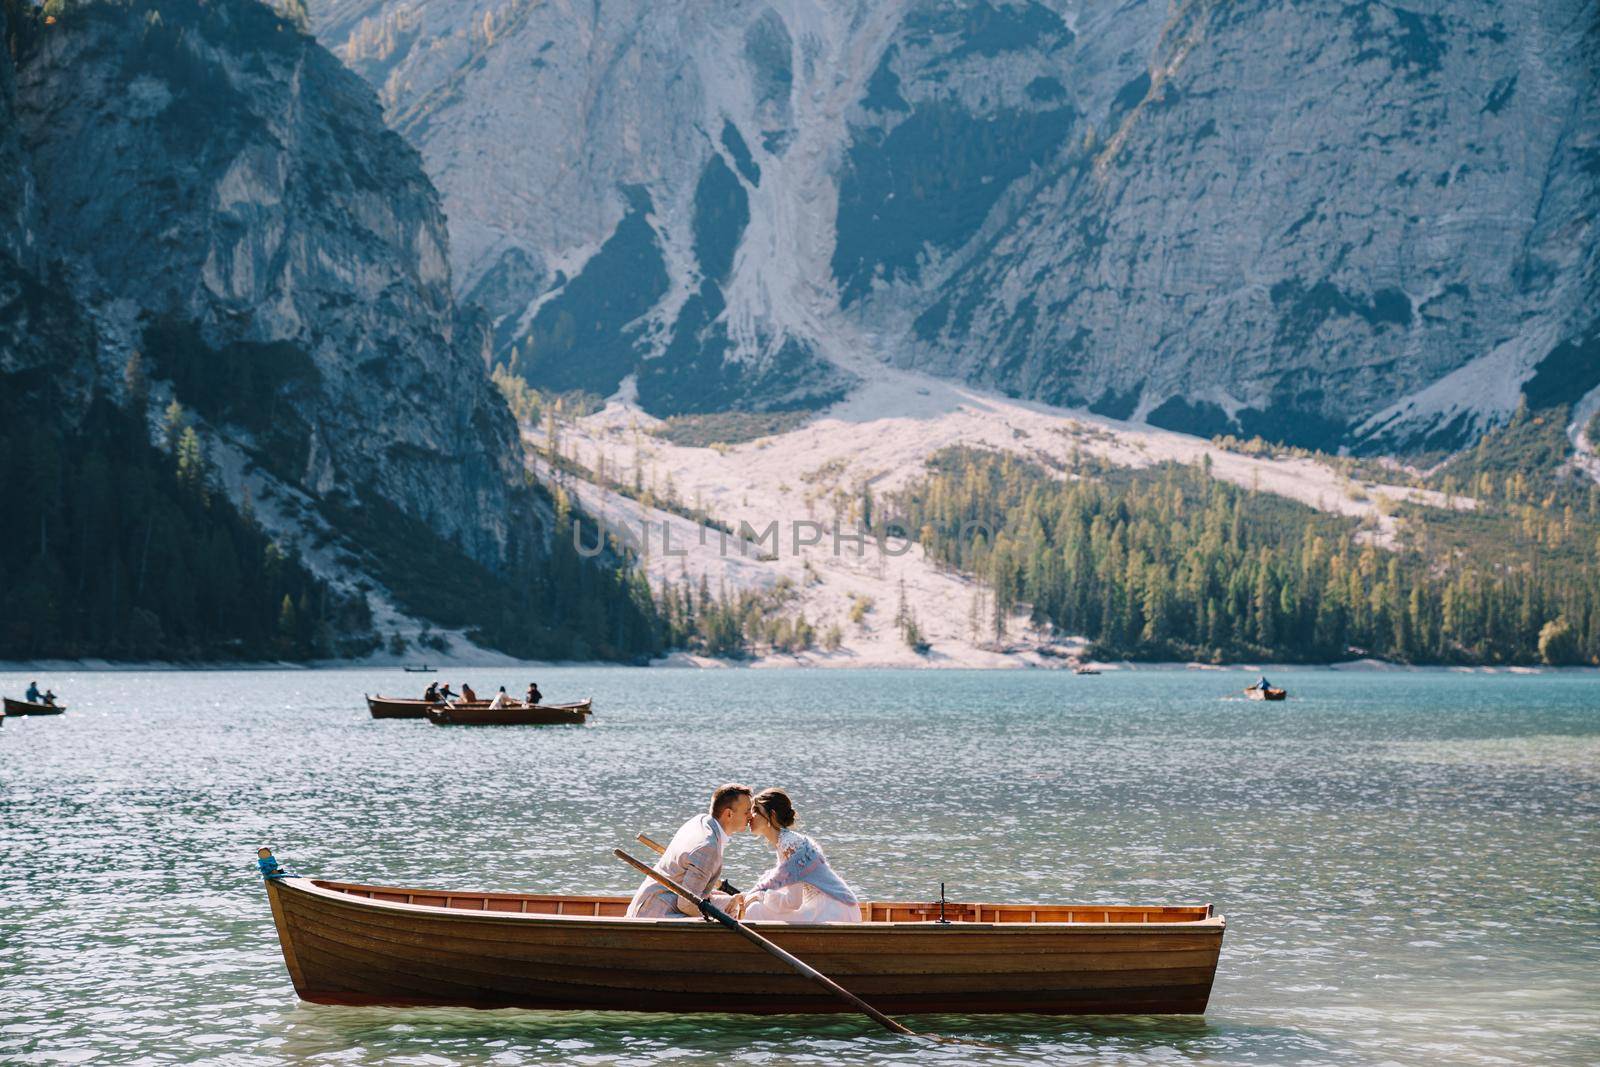 Bride and groom sail in a wooden boat at the Lago di Braies in Italy. Wedding in Europe, on Braies lake. The newlyweds are sitting in the boat and kissing. by Nadtochiy